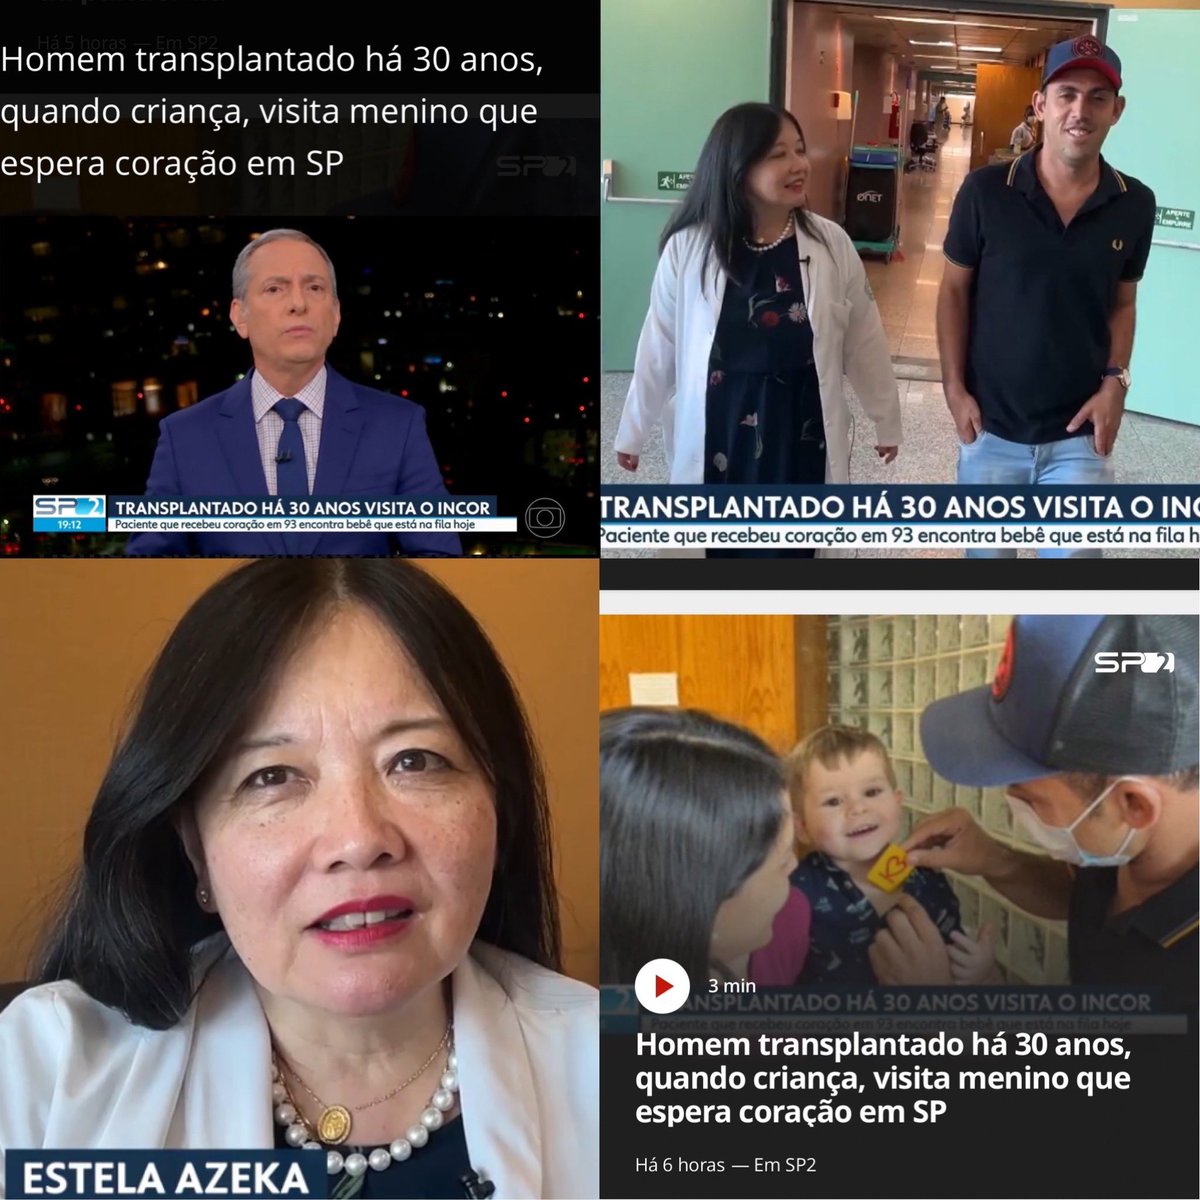 🇧🇷gratidão SPTV 2 ed 🙏🎬; 🇺🇸gratitude SPTV 2 d - Channel 5: man transplanted when he was a child visited another child listed for transplant #gooddeed